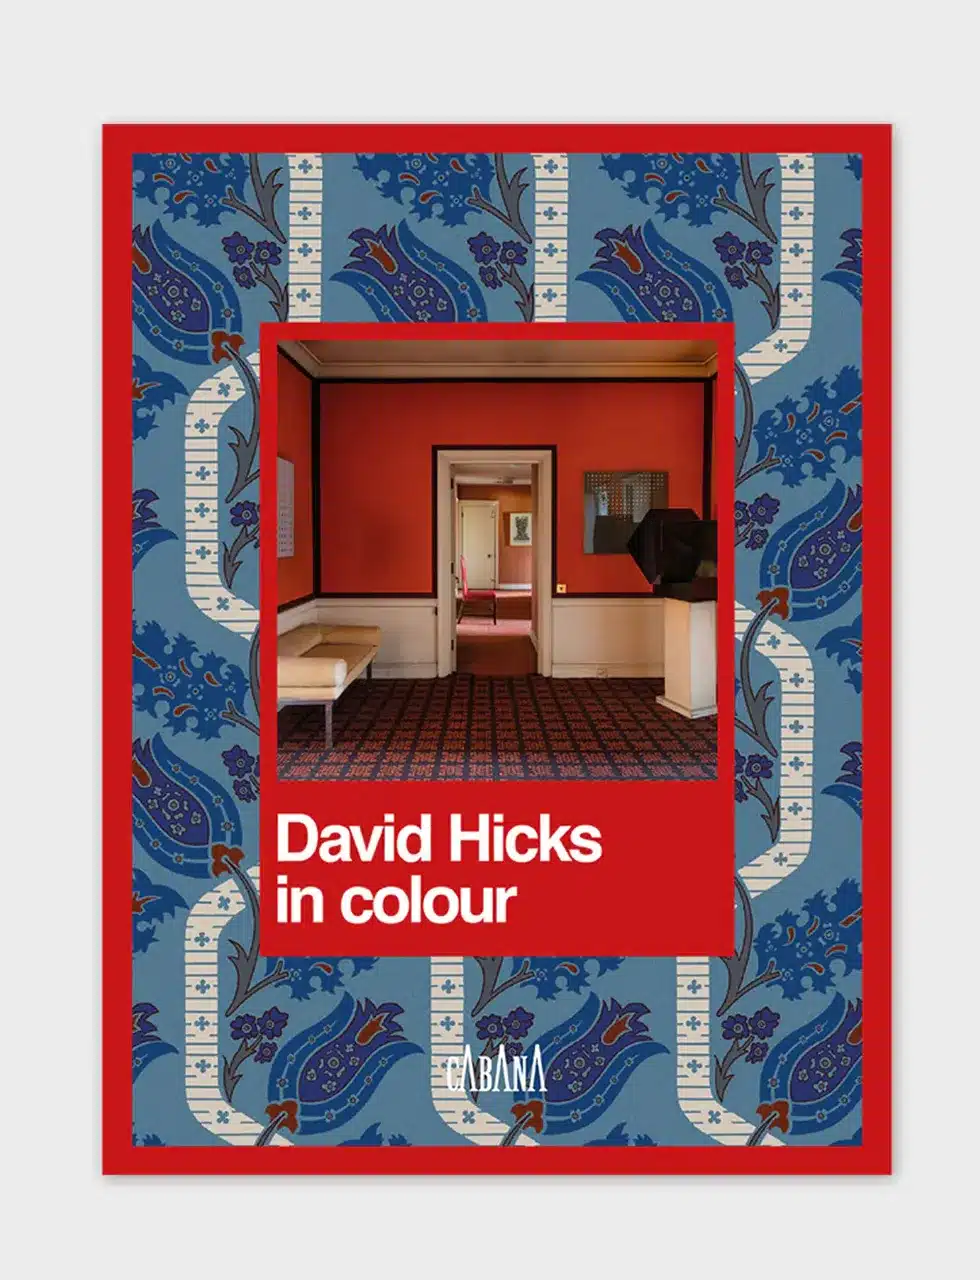 david hicks in colour is by the father of interior design, and one of katharine pooleys biggest loves